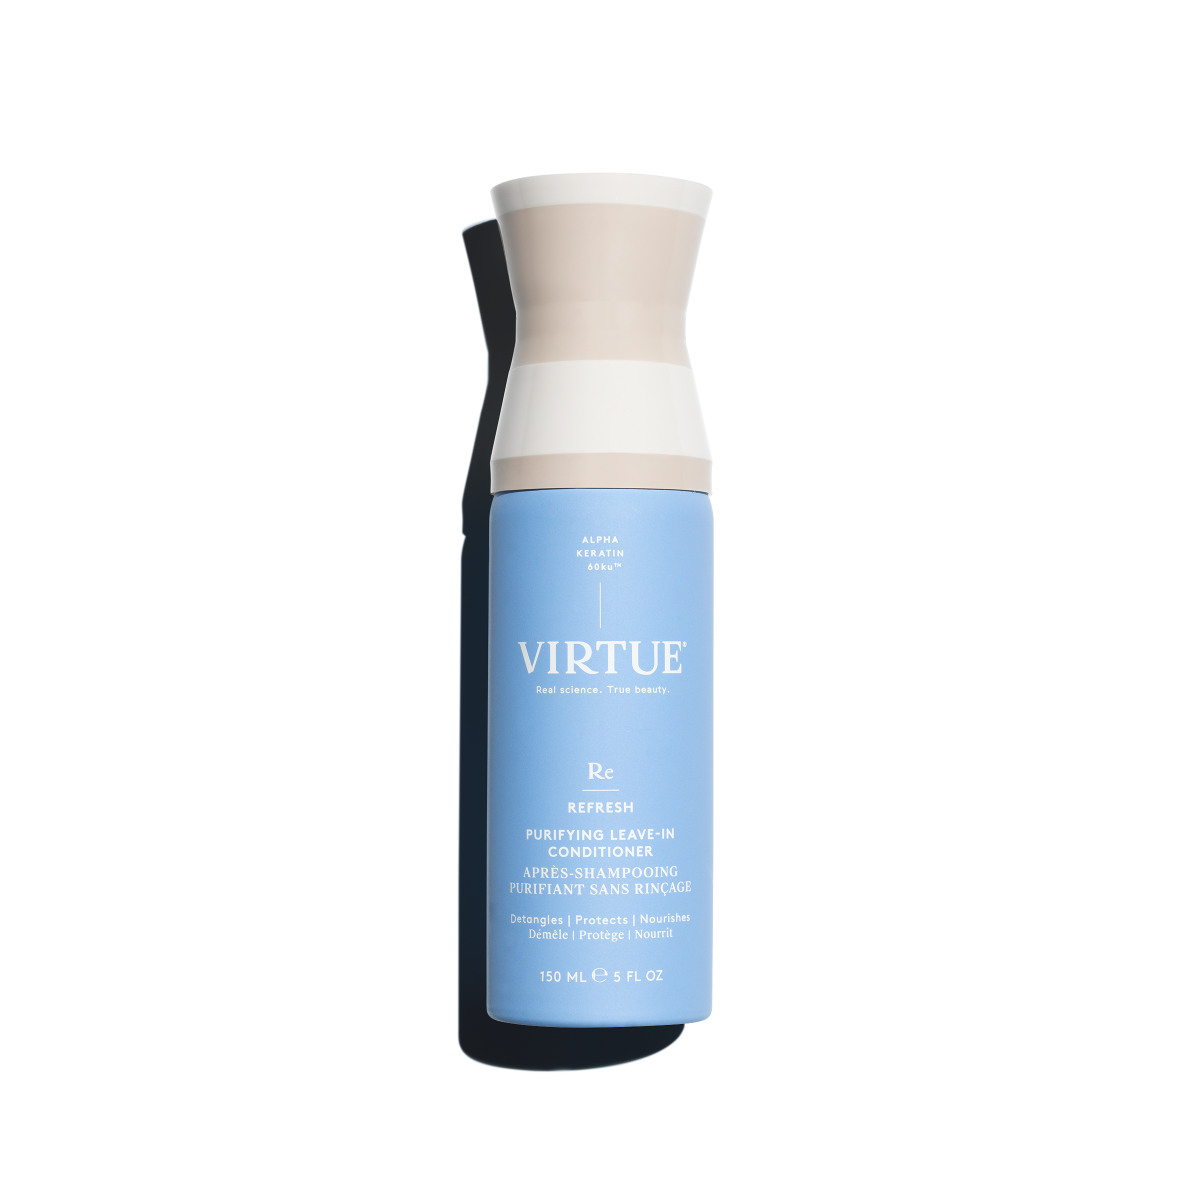 Virtue Purifying Leave-In Conditioner